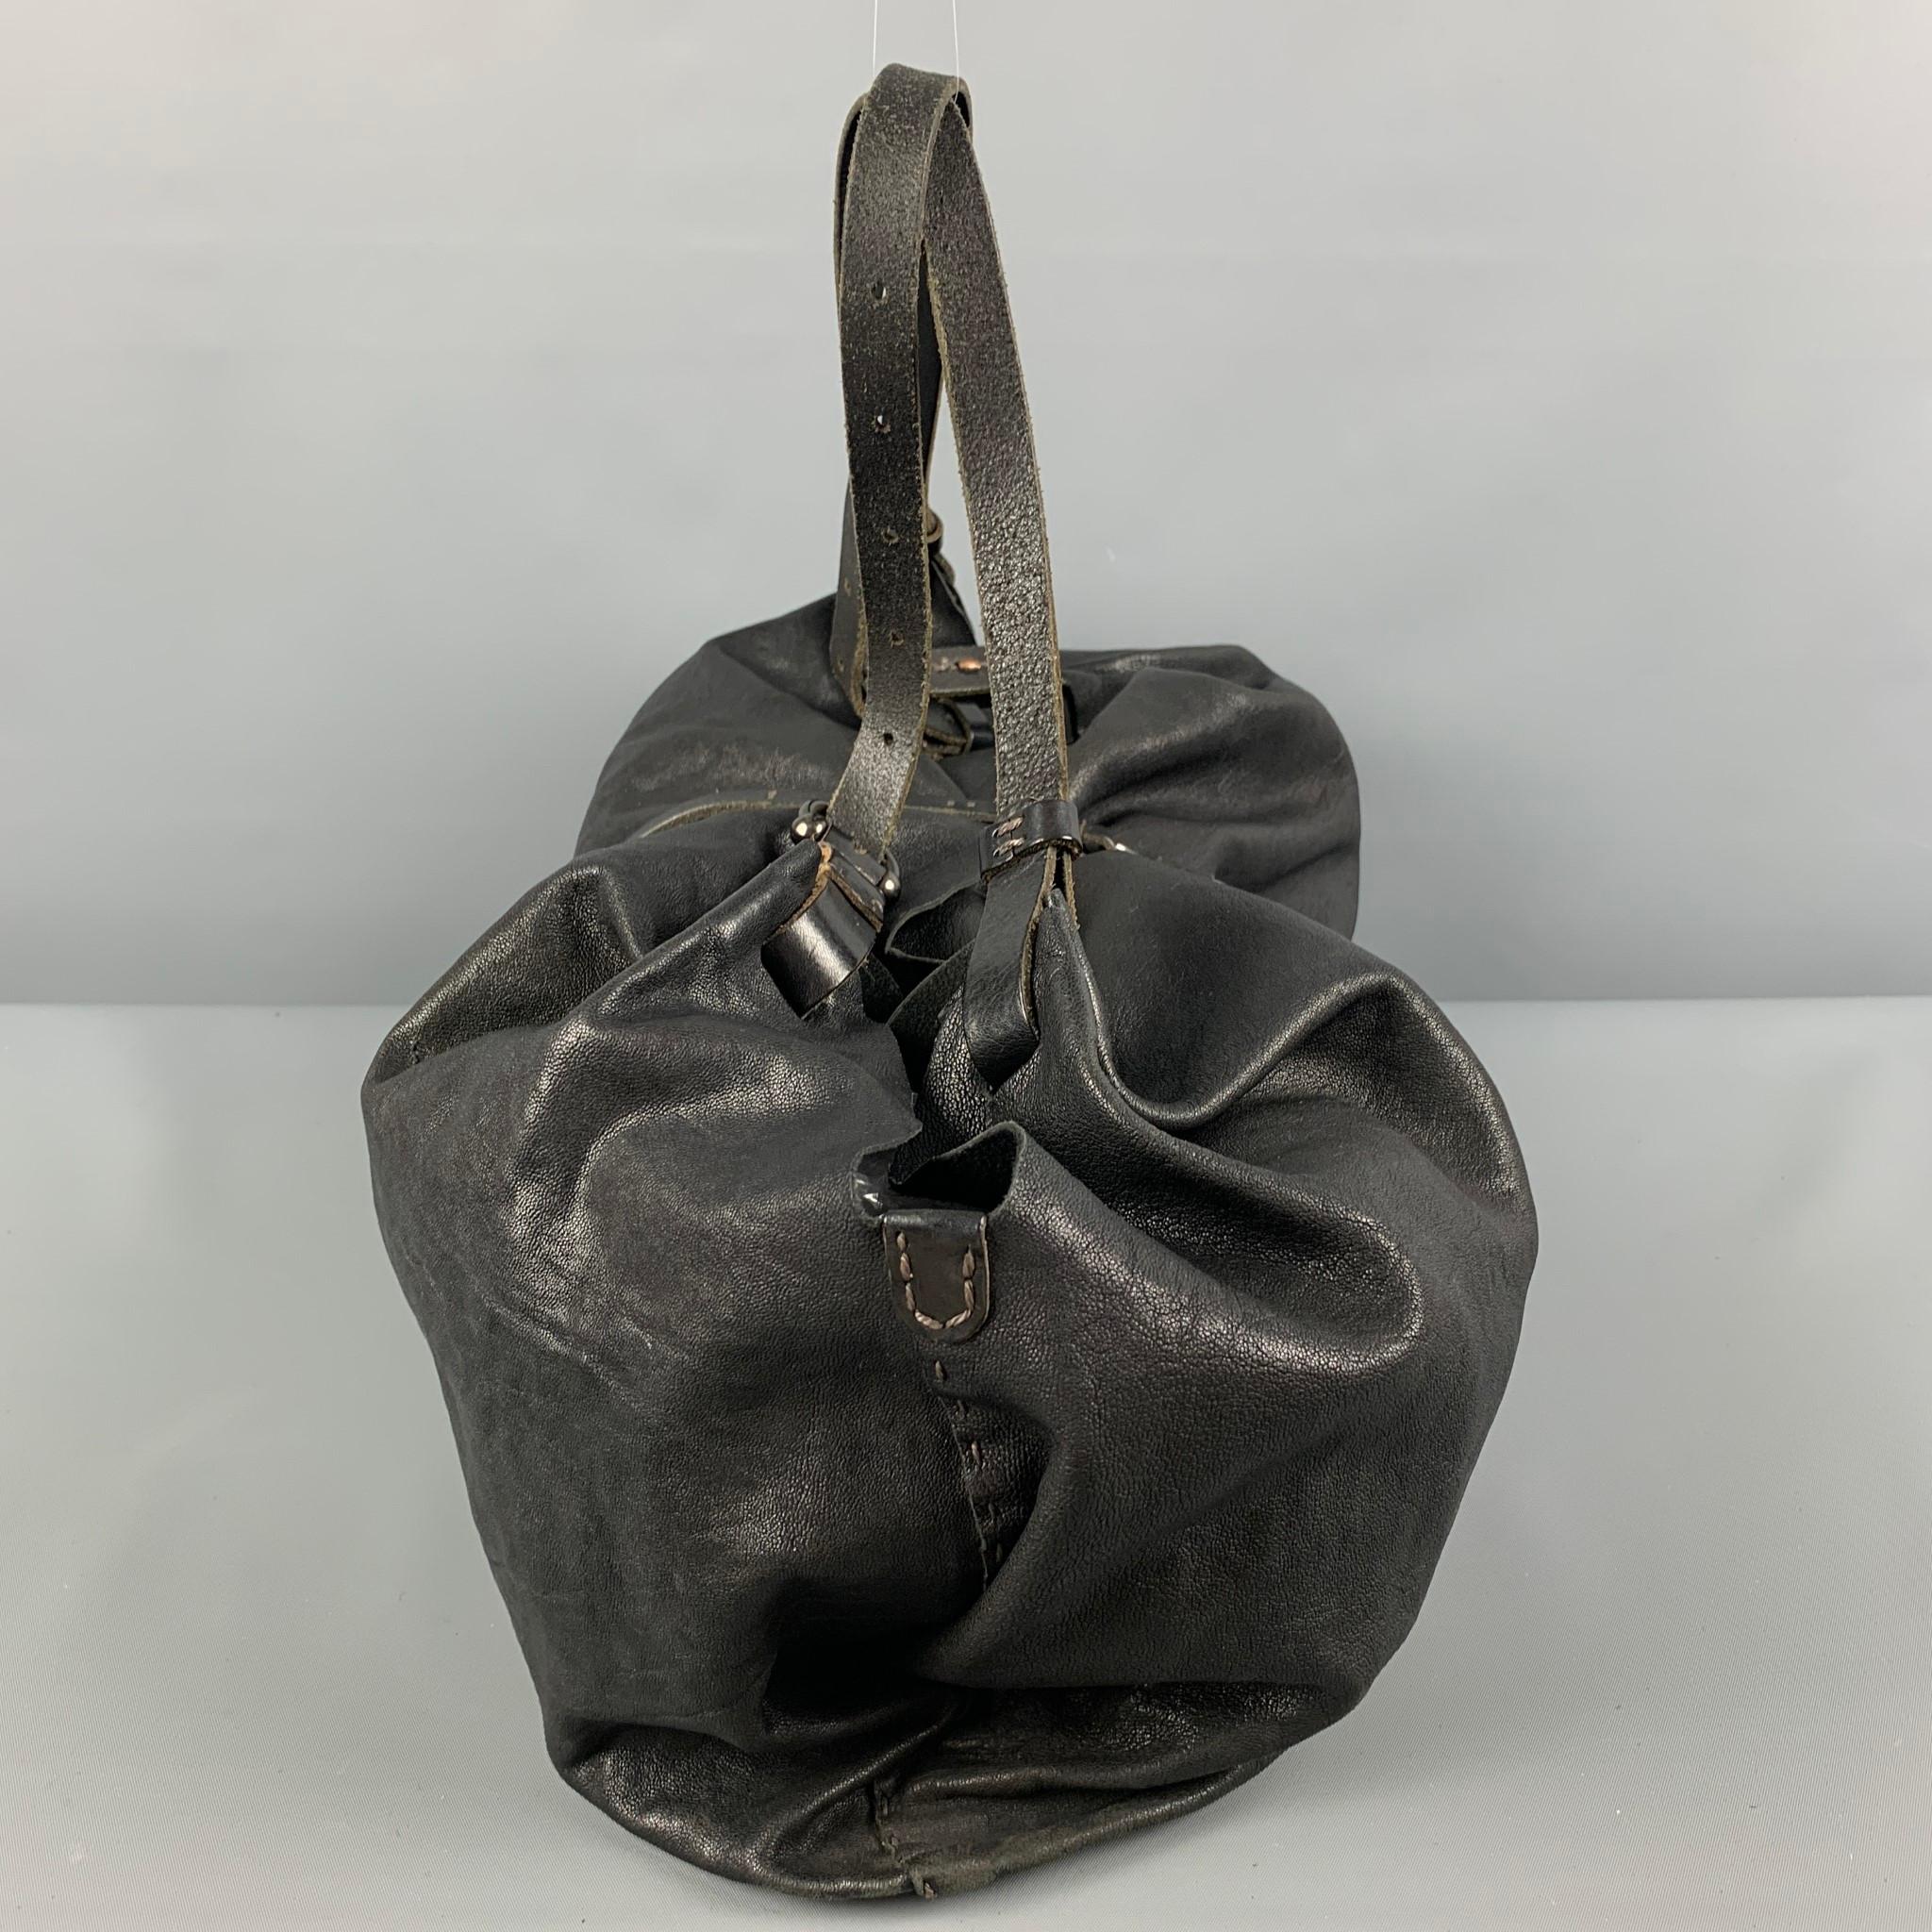 HENRY BEGUELIN bag comes in a black distressed leather featuring top handles, wallet attachment, silver ton hardware, and a front clasp closure. Includes tags & dust bag.

Very Good Pre-Owned Condition.

Measurements:

Length: 21 in.
Width: 10